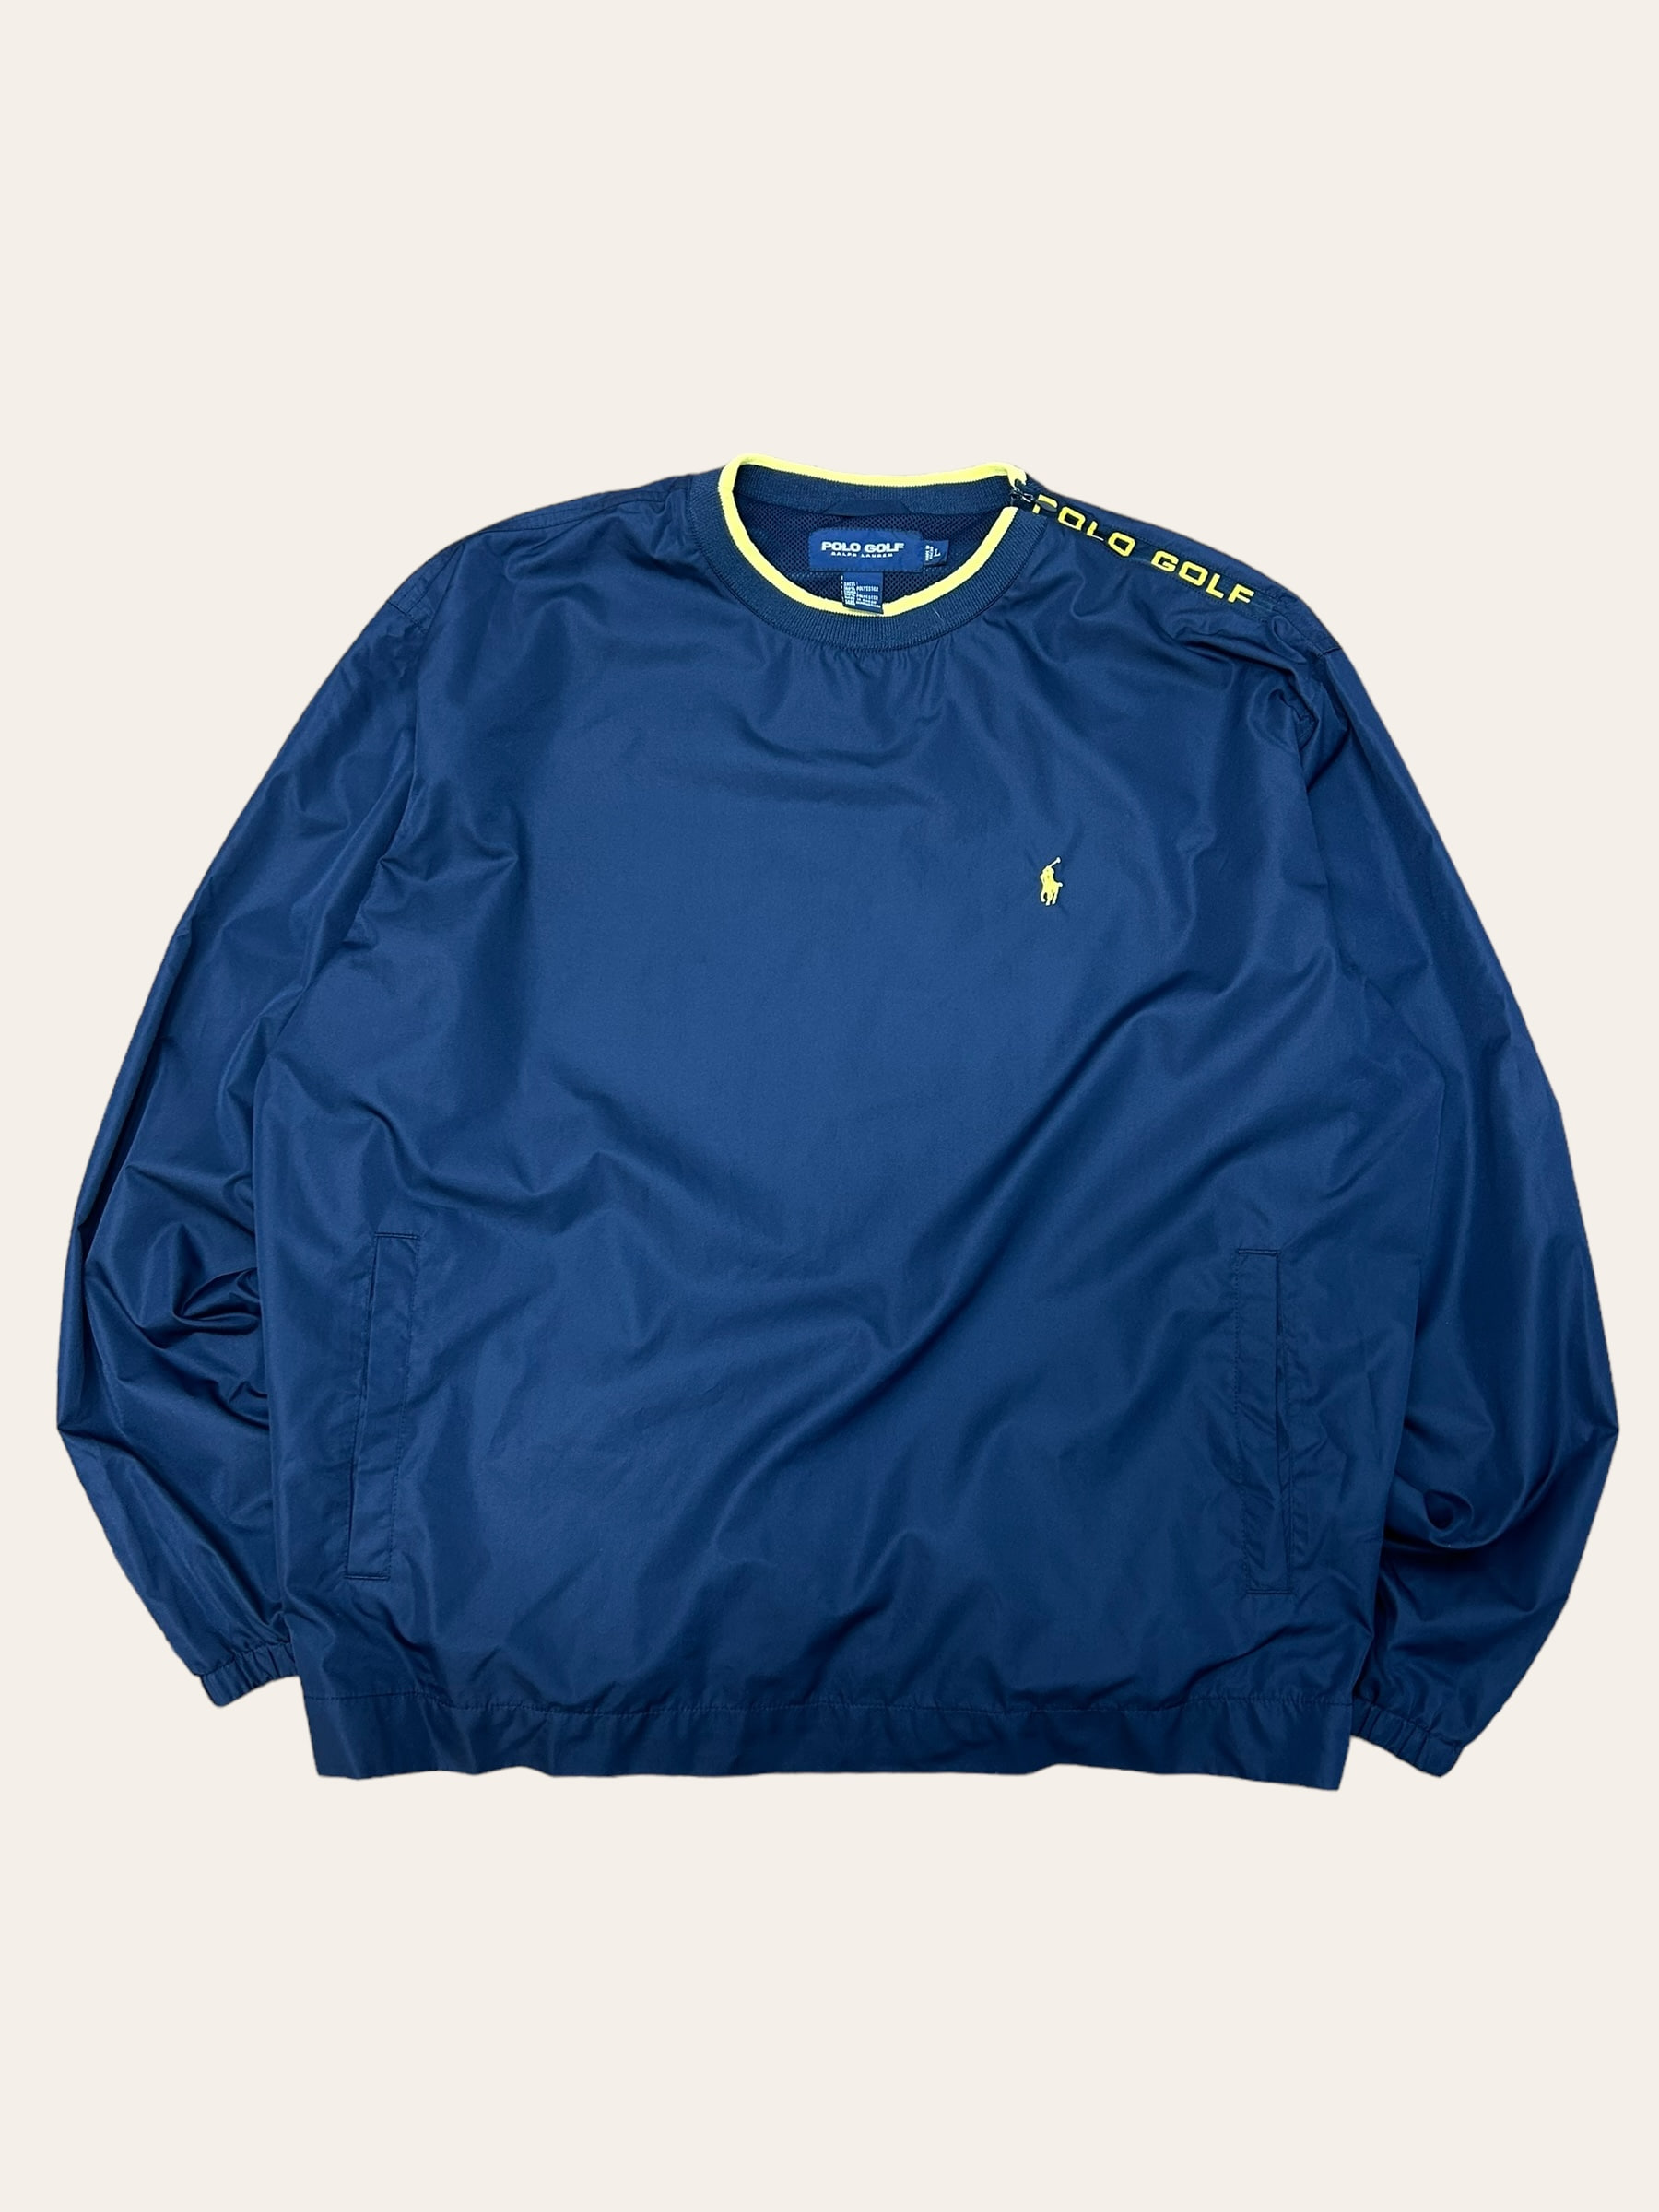 POLO GOLF navy polyester warm up pullover jacket L